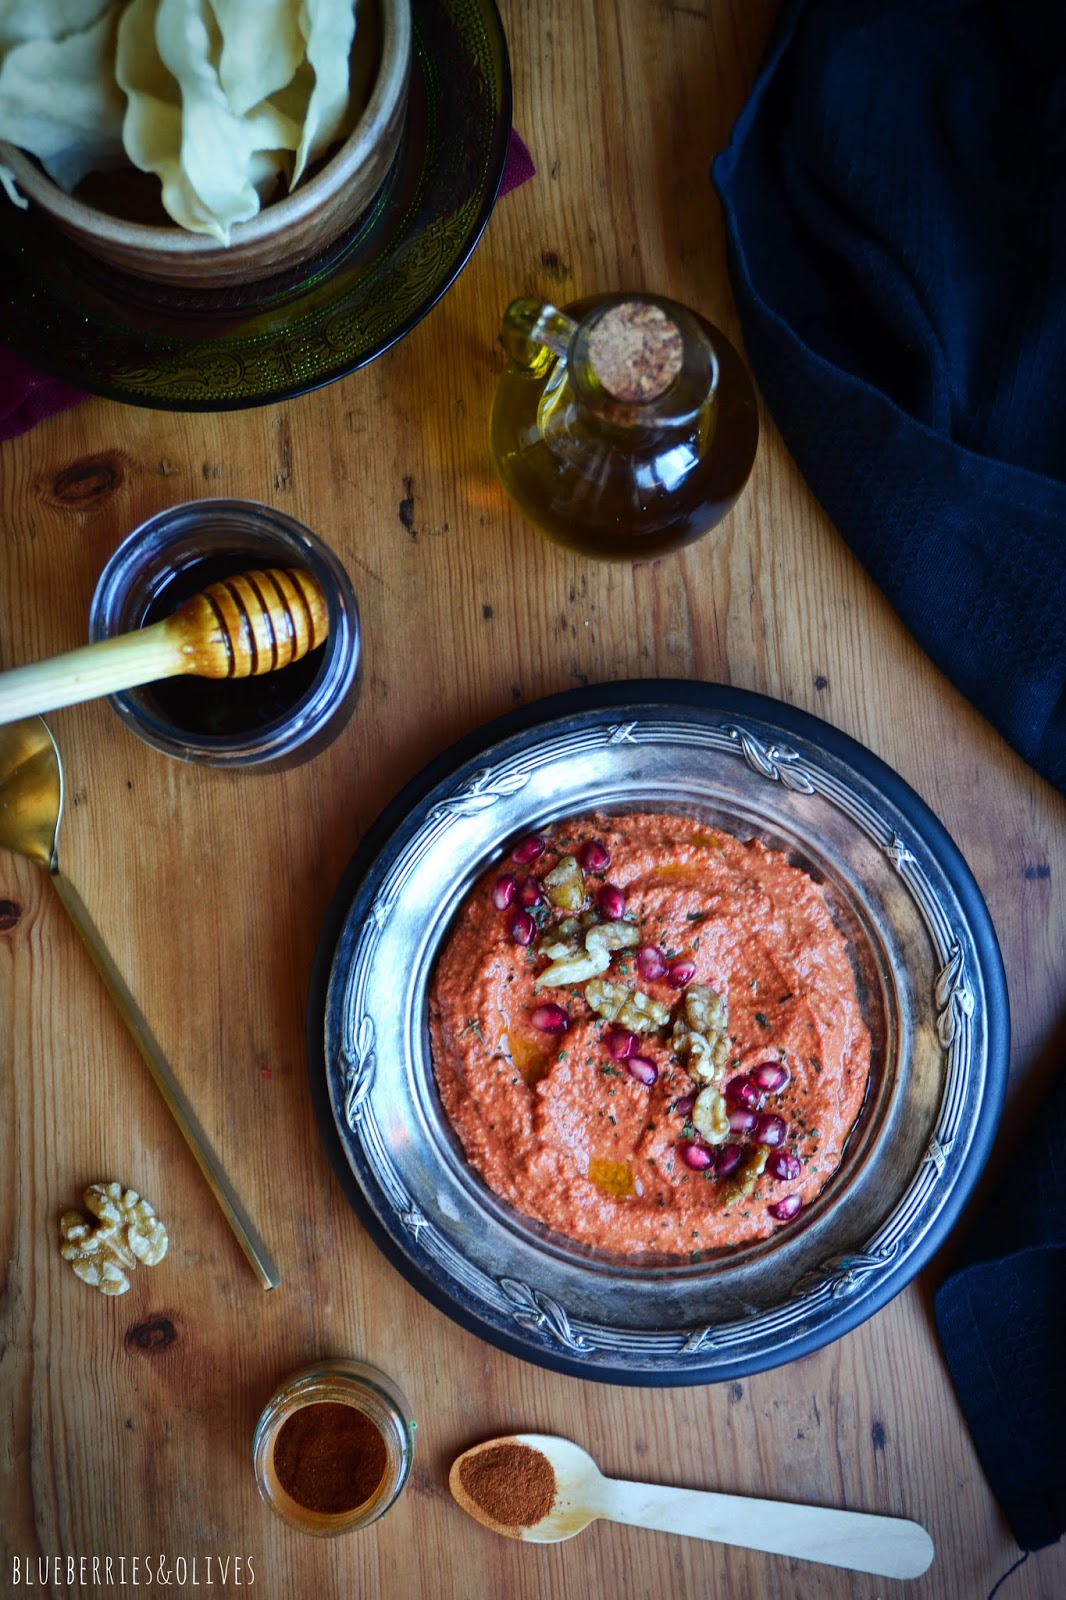 MUHAMMARA, SYRIAN DIP WITH PEPPERS AND WALNUTS